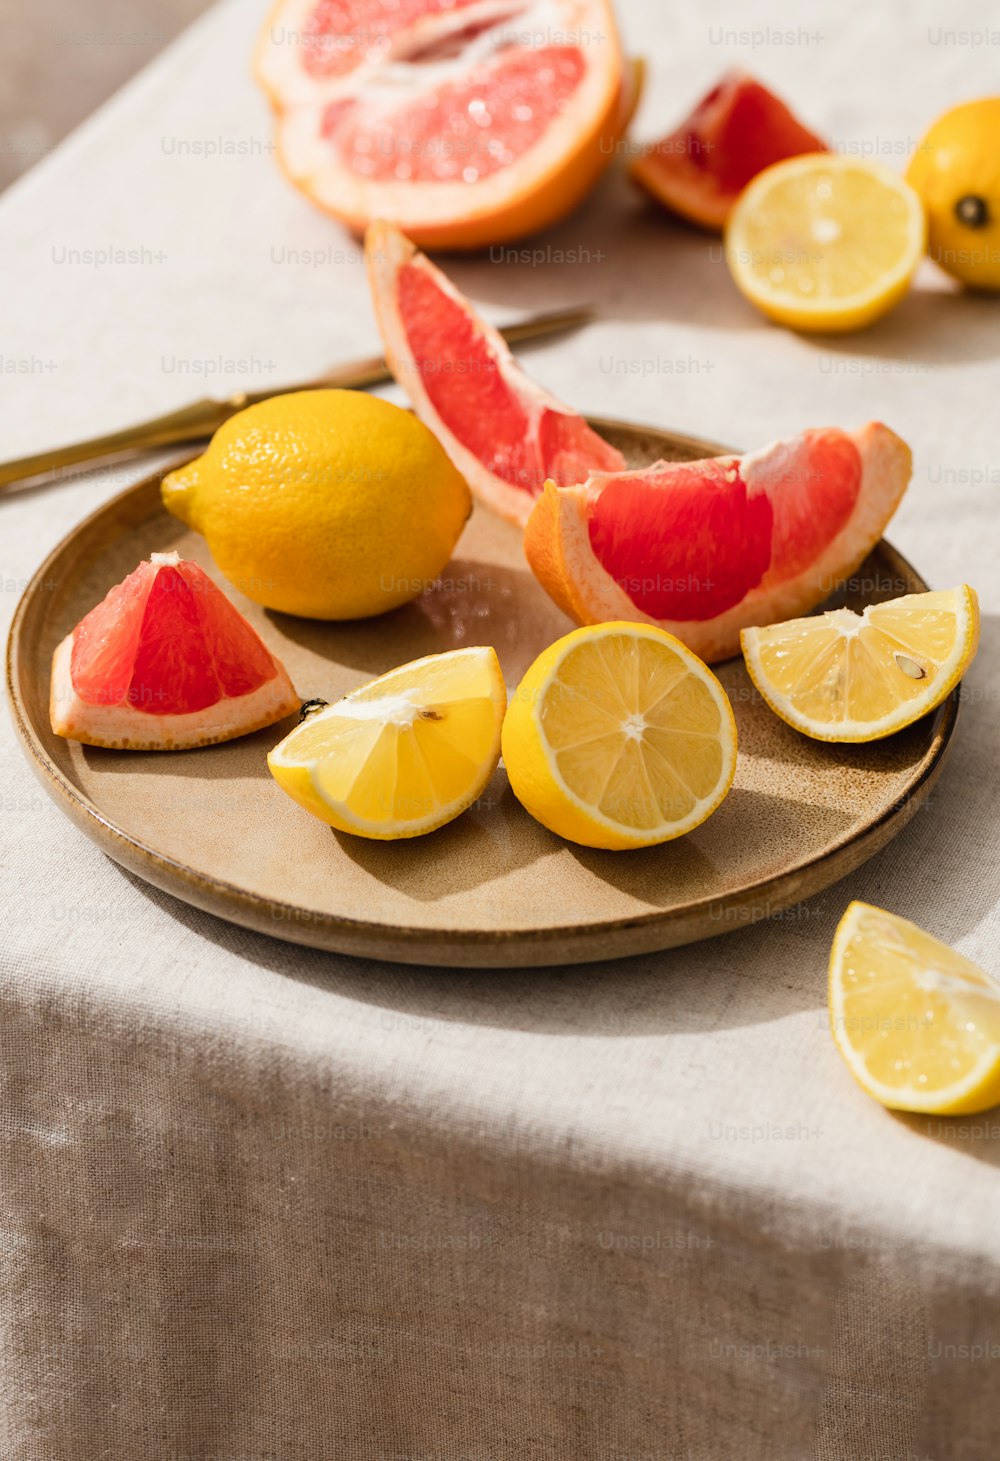 a plate full of sliced up lemons and grapefruits